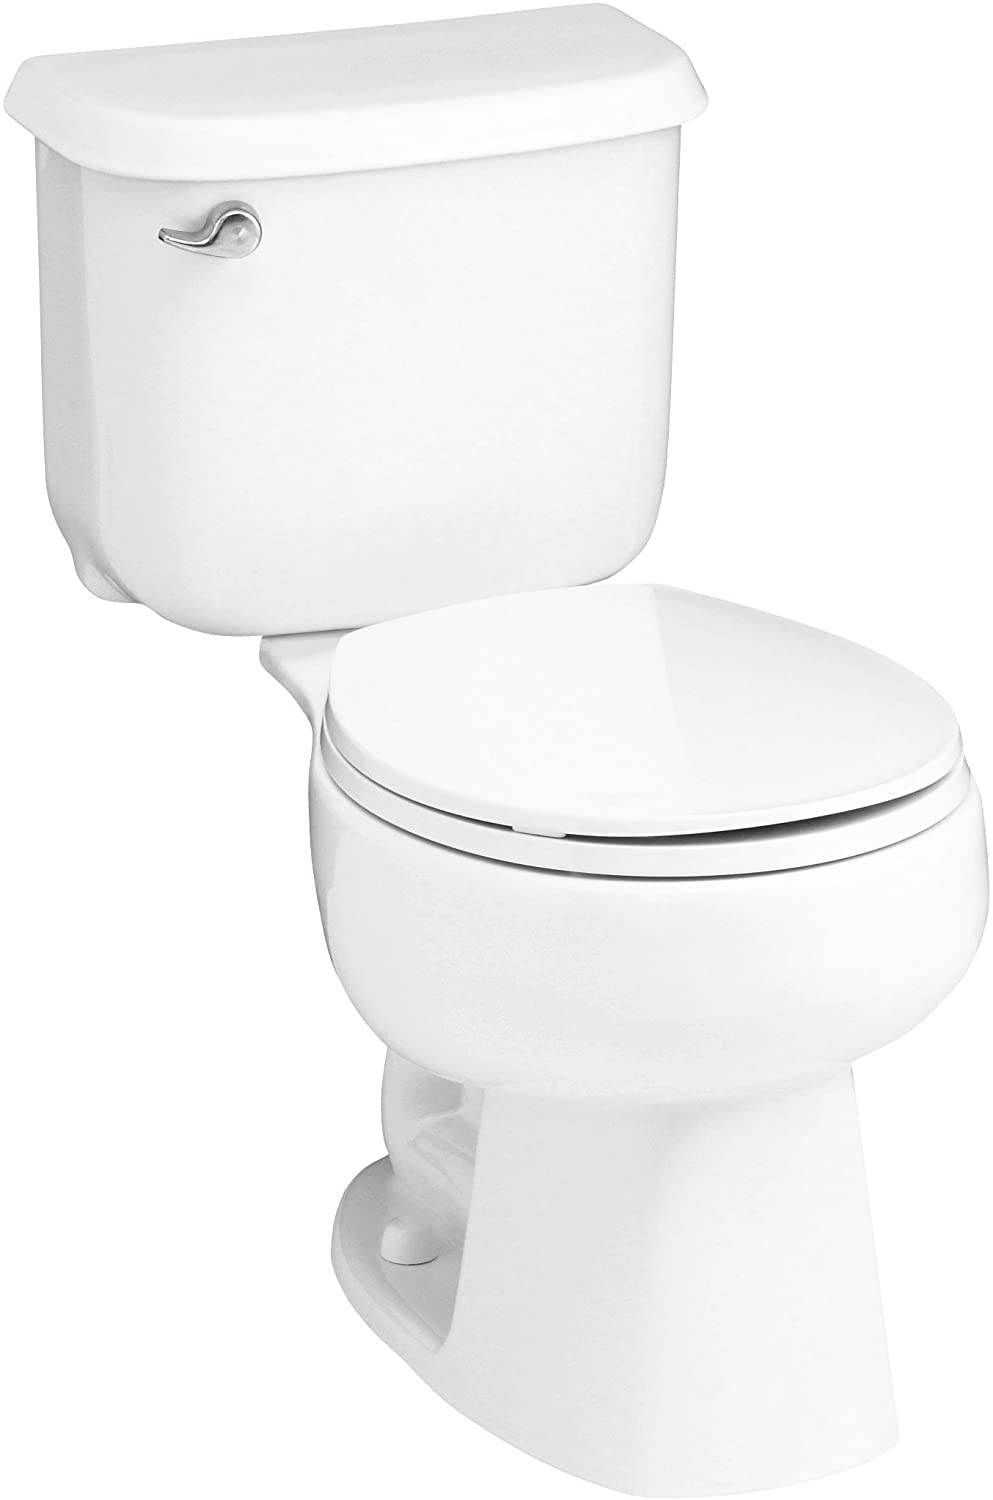 STERLING 402015-0 Windham 12" Rough-In Round Toilet